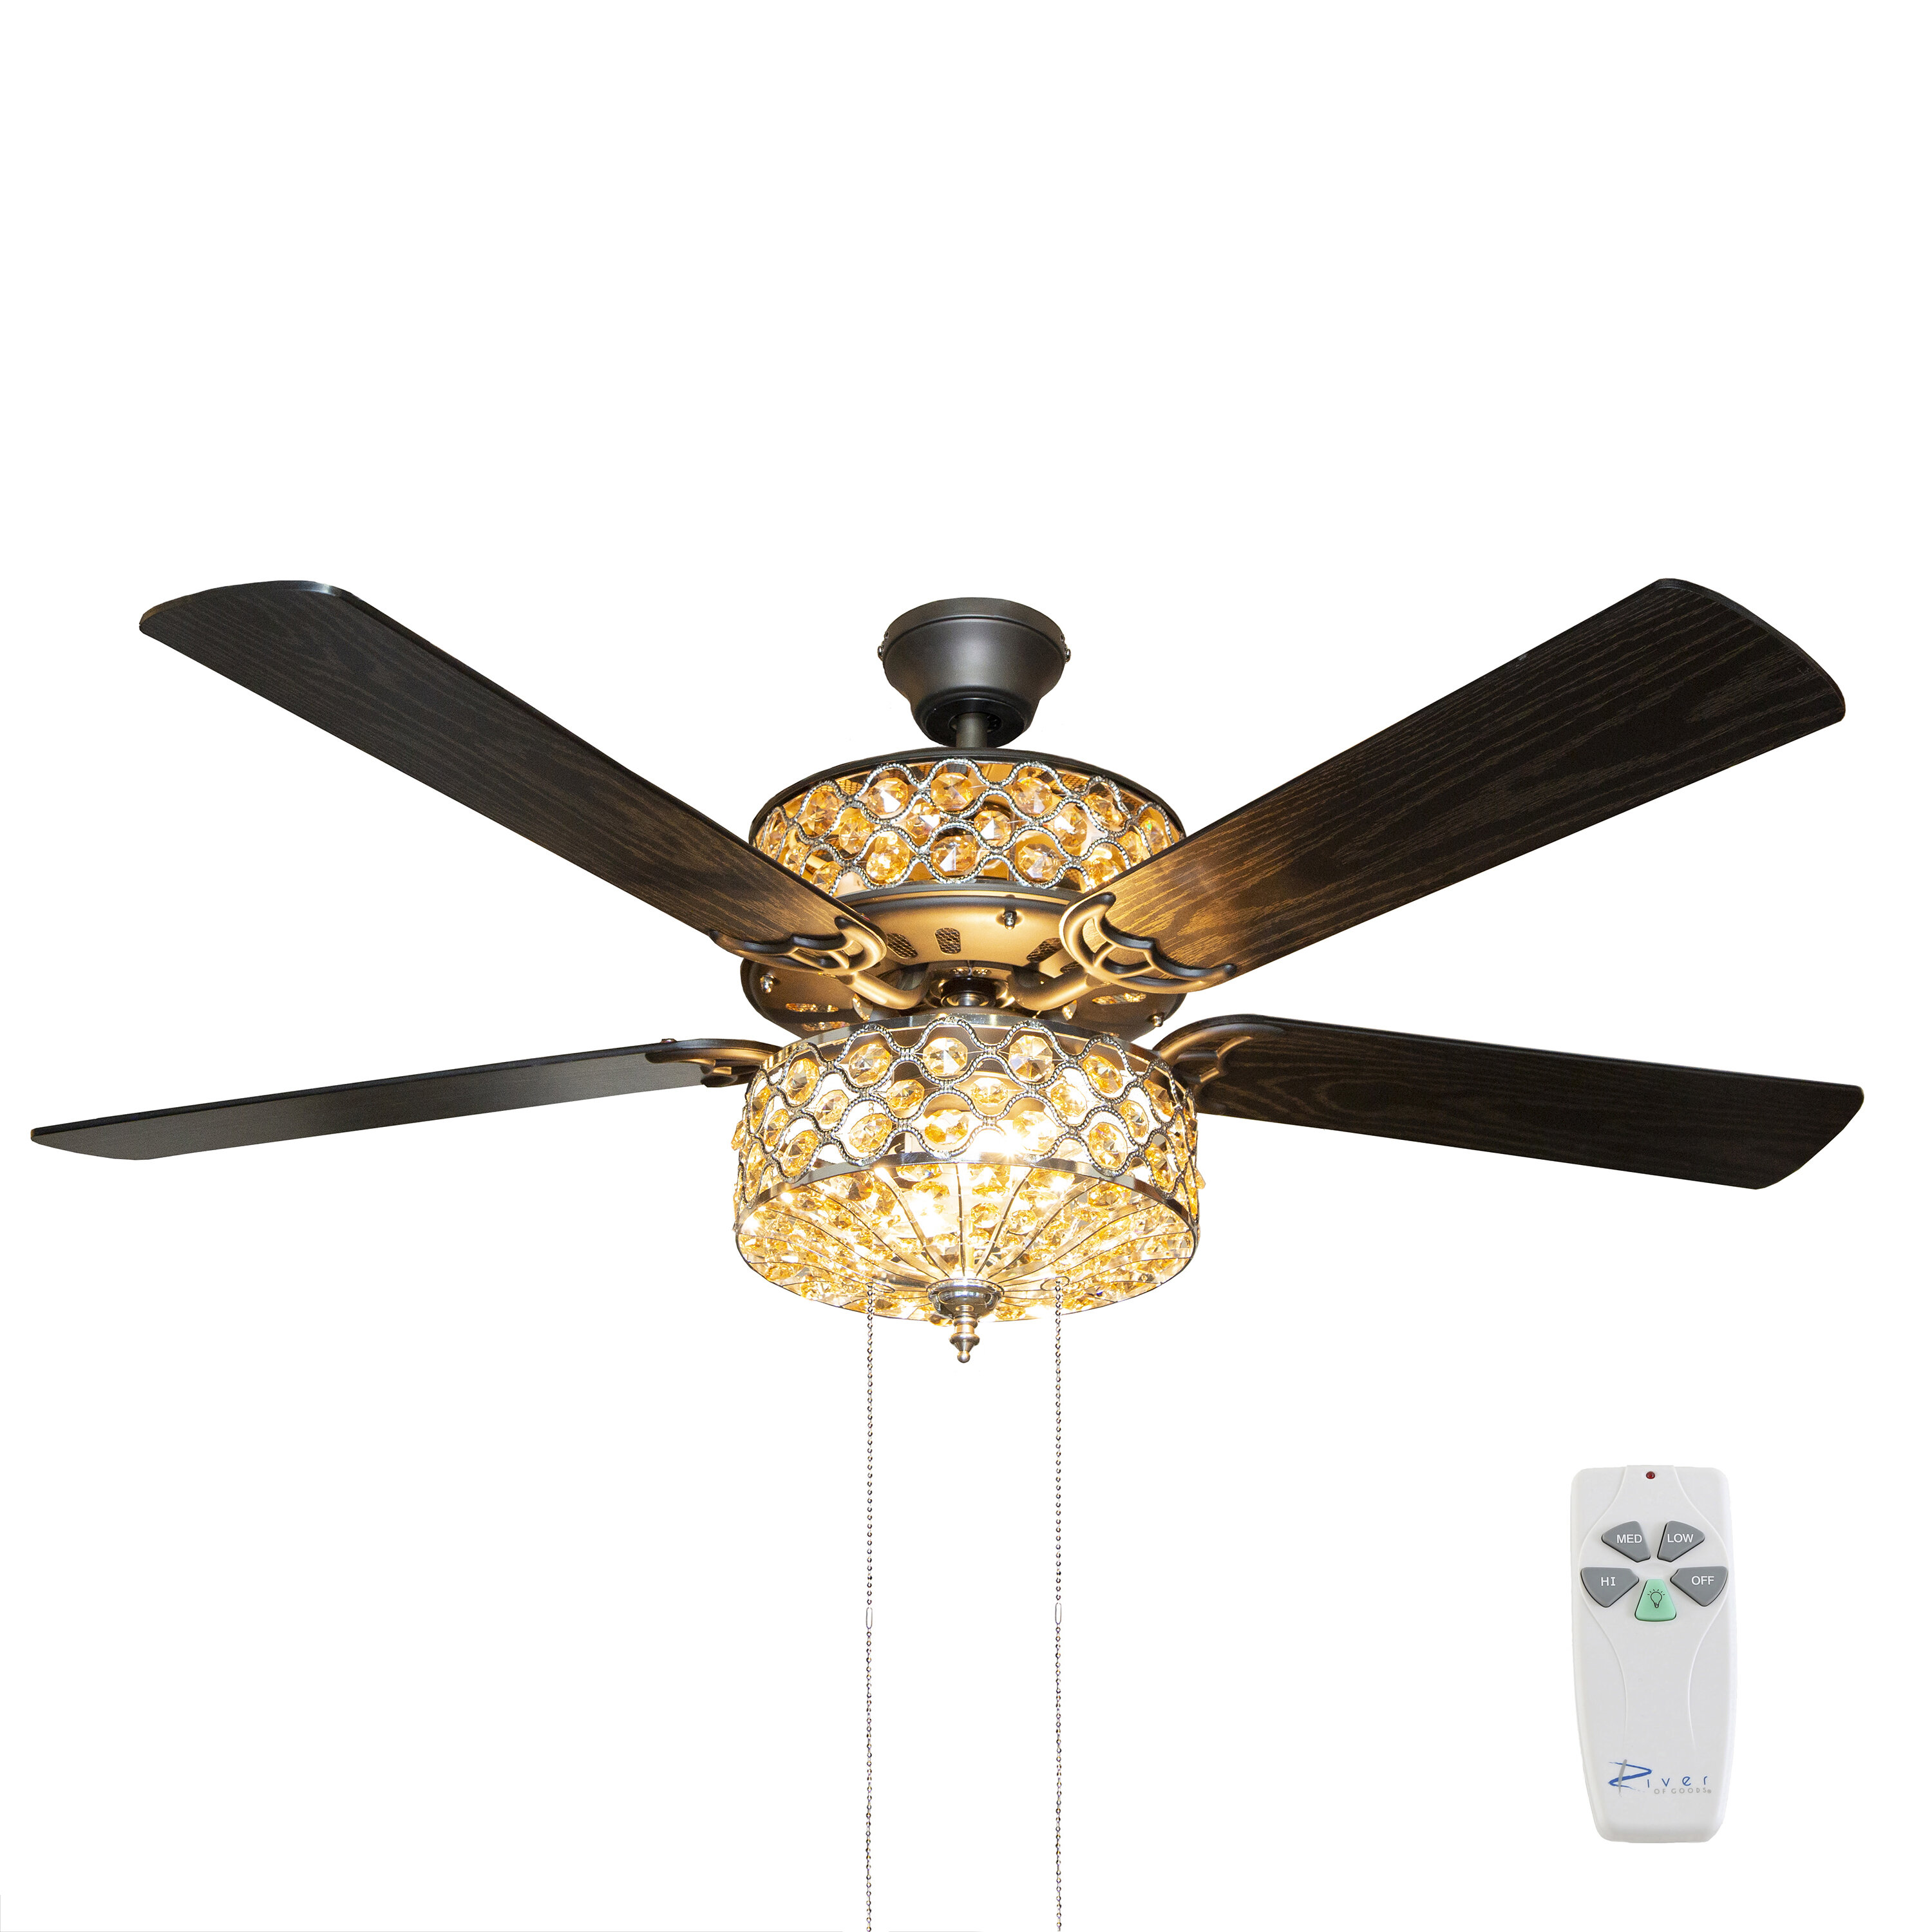 House Of Hampton 52 Irven 5 Blade Ceiling Fan Light Kit Included